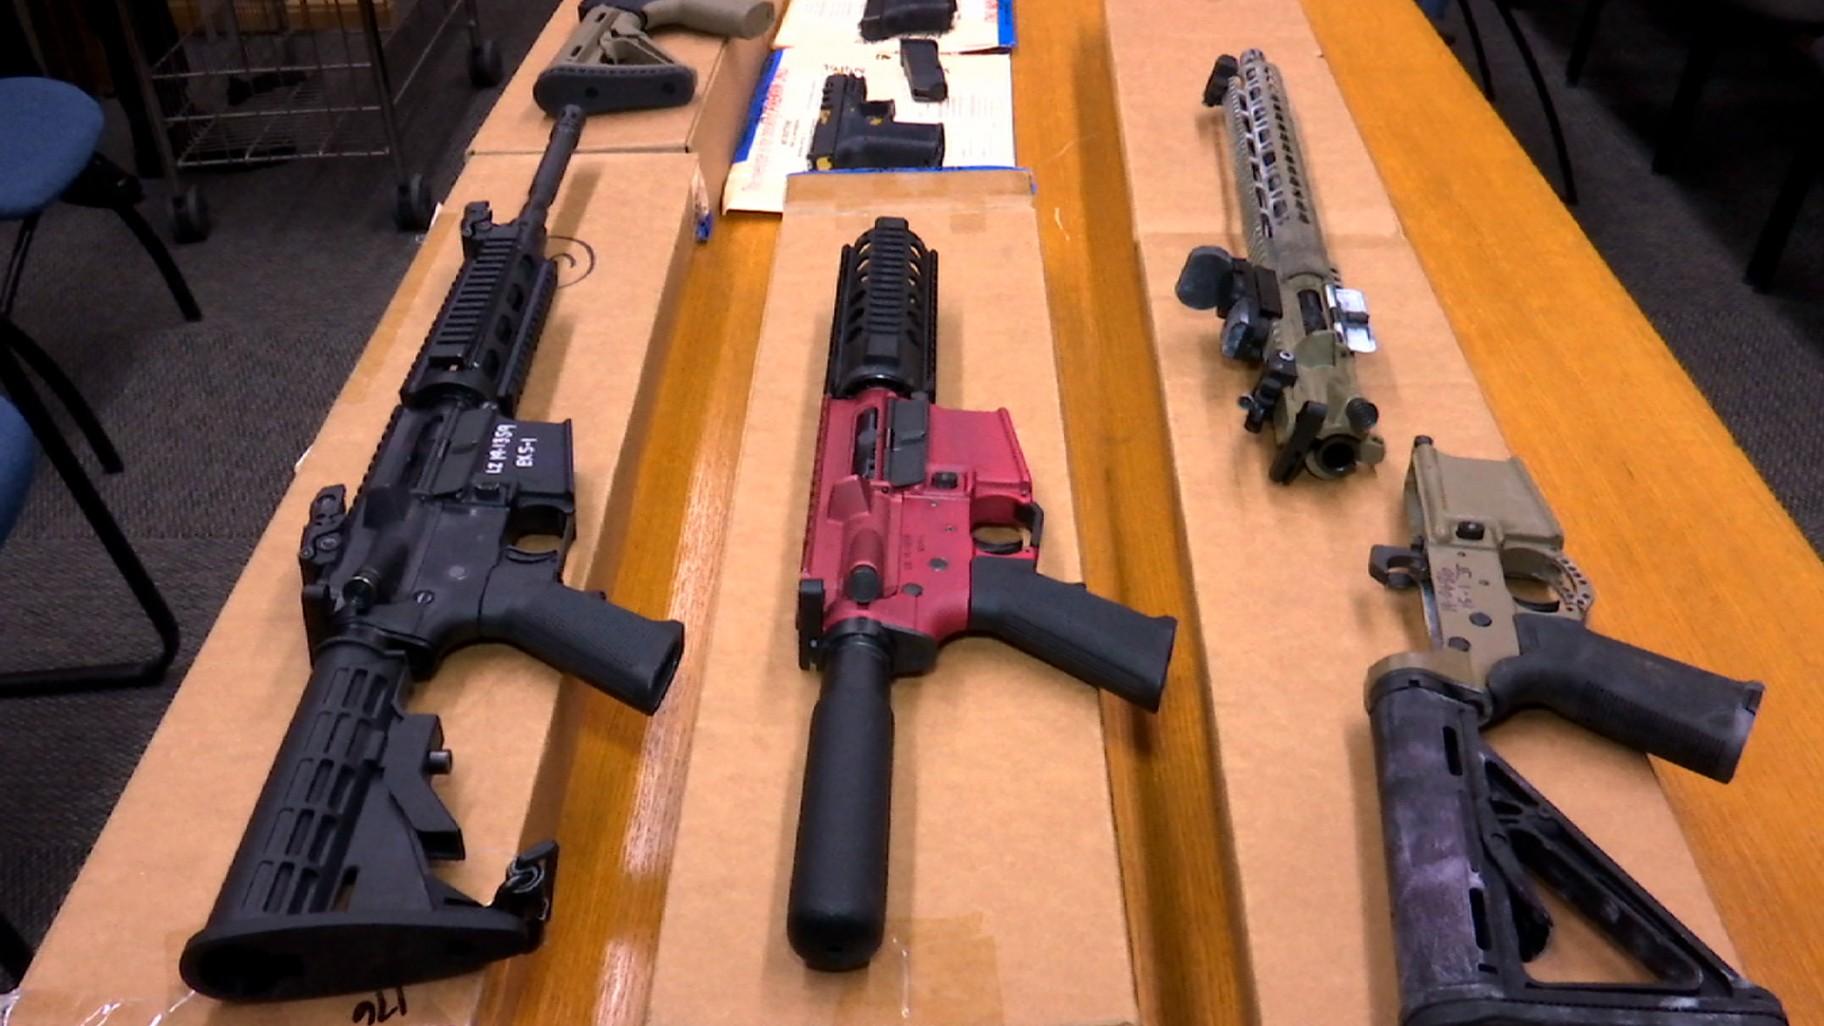 This Nov. 27, 2019, file photo shows “ghost guns” on display at the headquarters of the San Francisco Police Department in San Francisco. (AP Photo / Haven Daley, File)